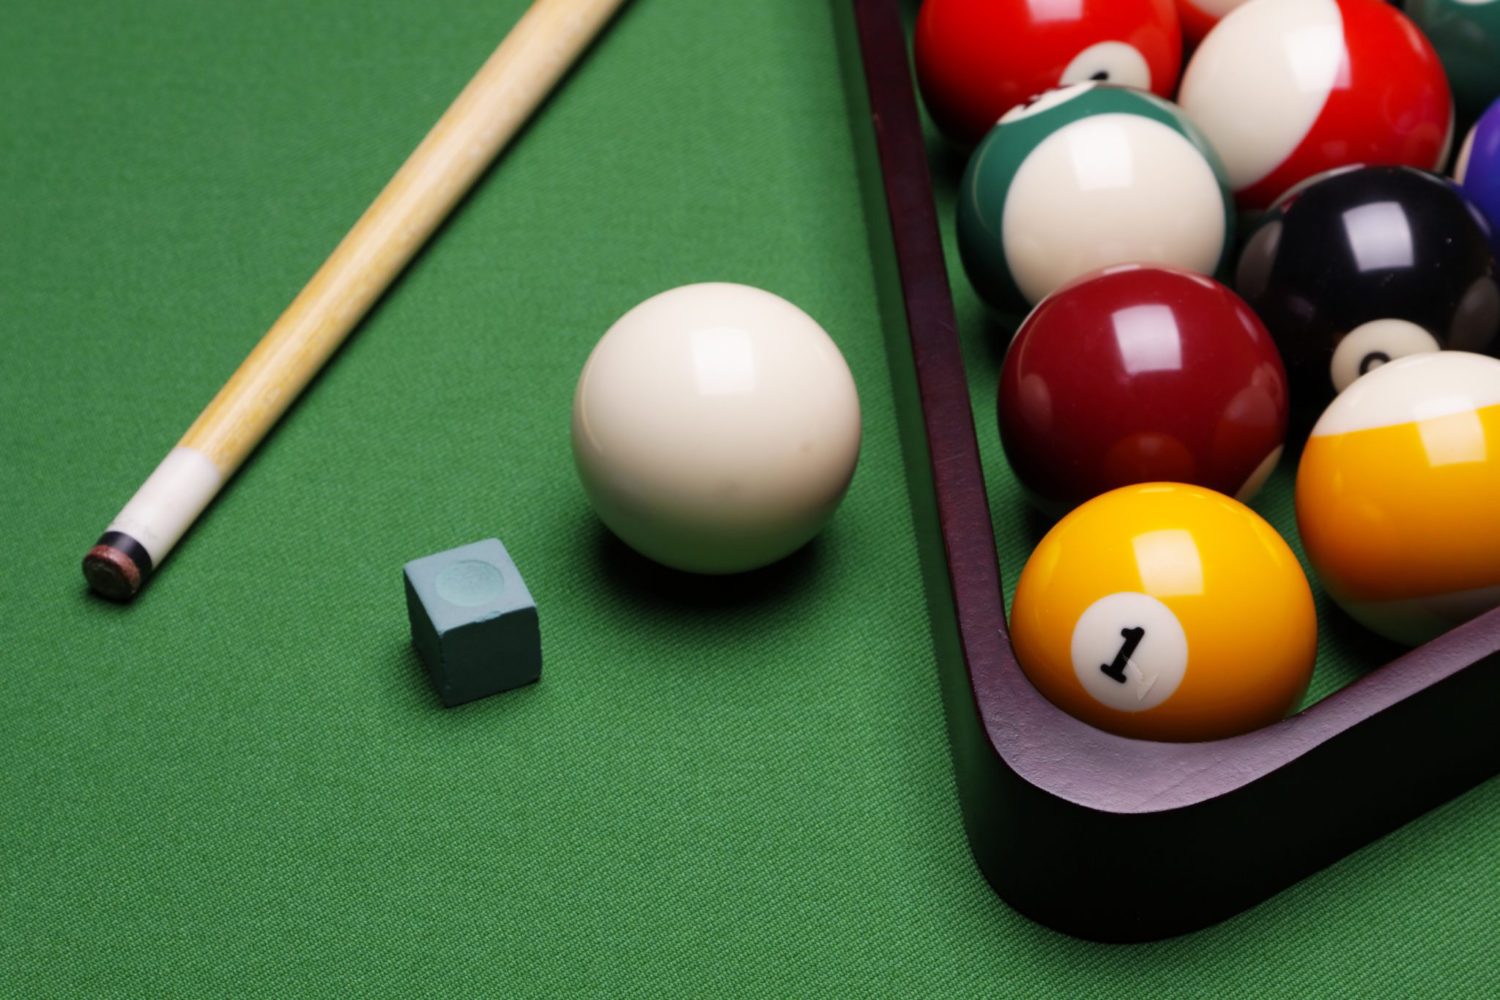 How to Play Billiards for Beginners